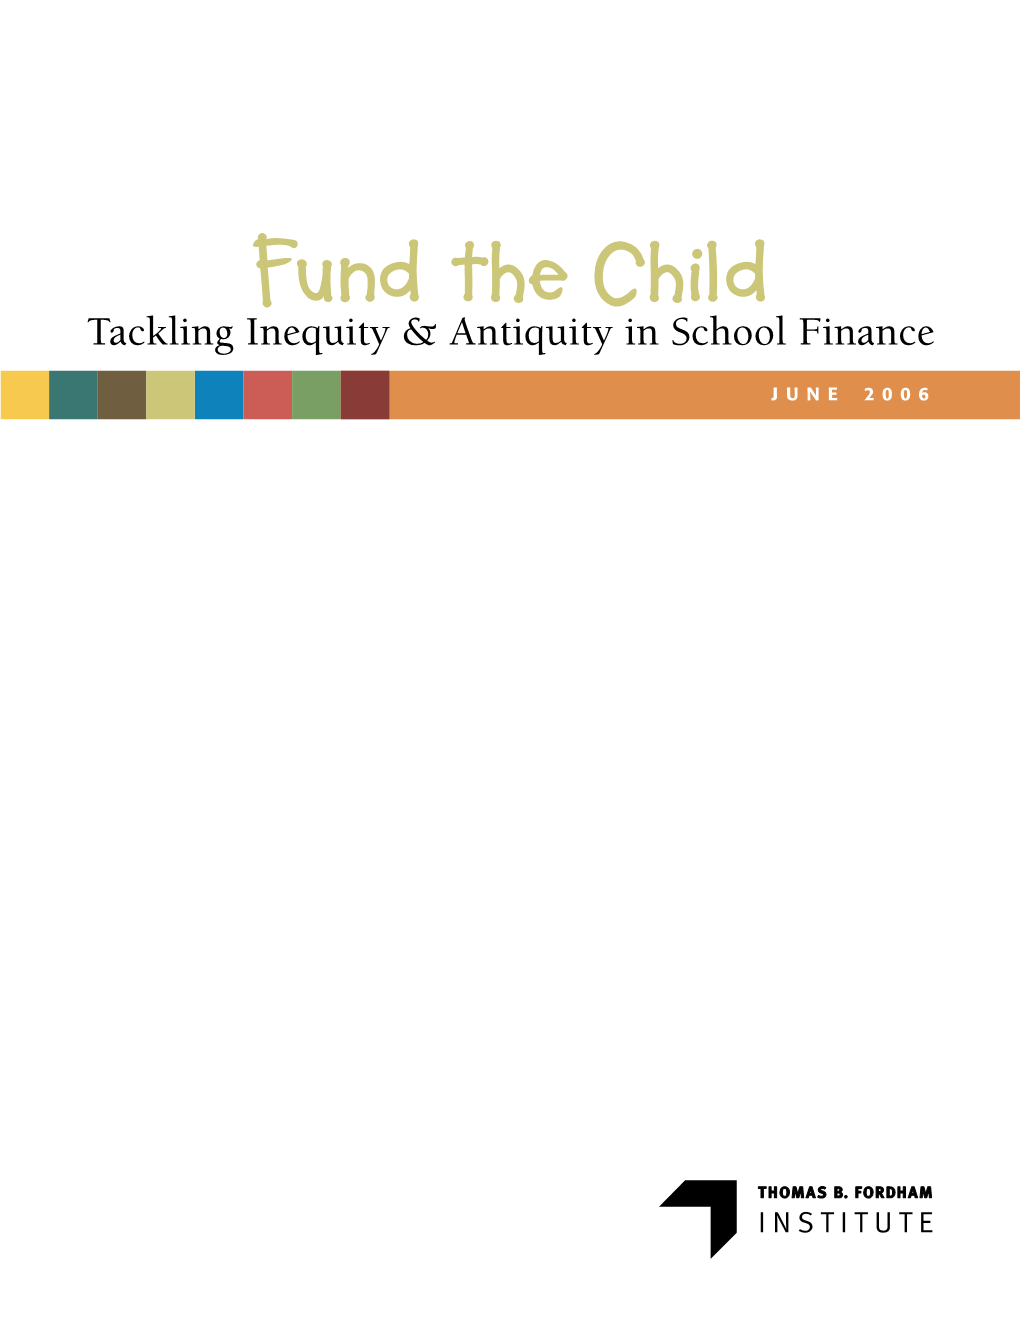 Fund the Child Tackling Inequity & Antiquity in School Finance